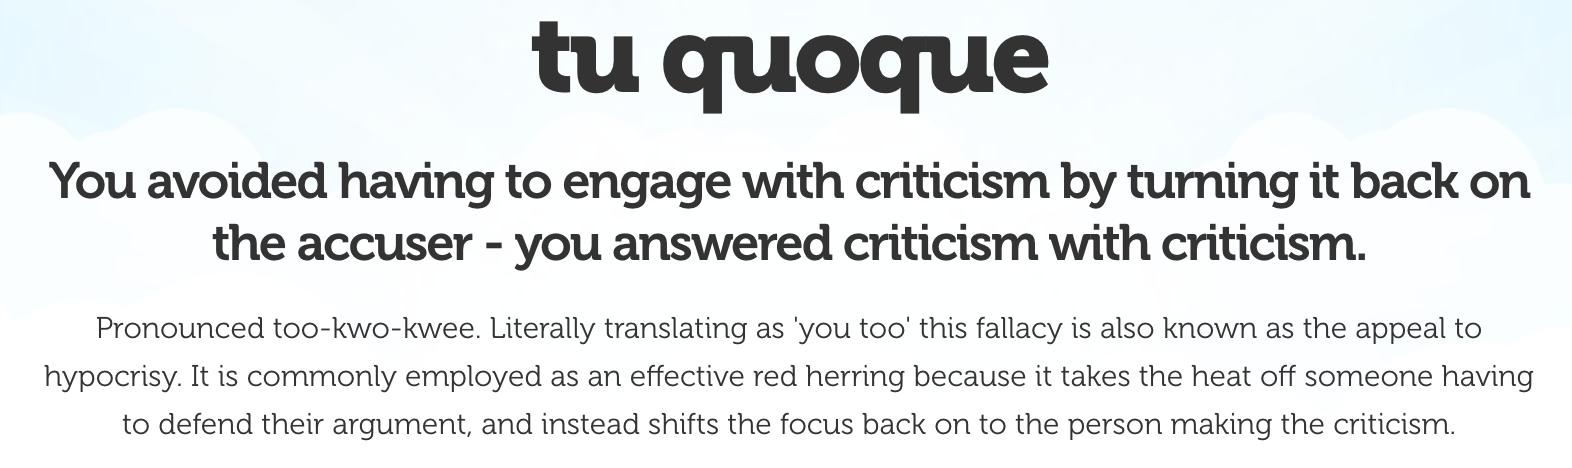 You avoided having to engage with criticism by turning it back on the accuser - you answered criticism with criticism. Pronounced too-kwo-kwee. Literally translating as 'you too' this fallacy is also known as the appeal to hypocrisy. It is commonly employed as an effective red herring because it takes the heat off someone having to defend their argument, and instead shifts the focus back on to the person making the criticism.